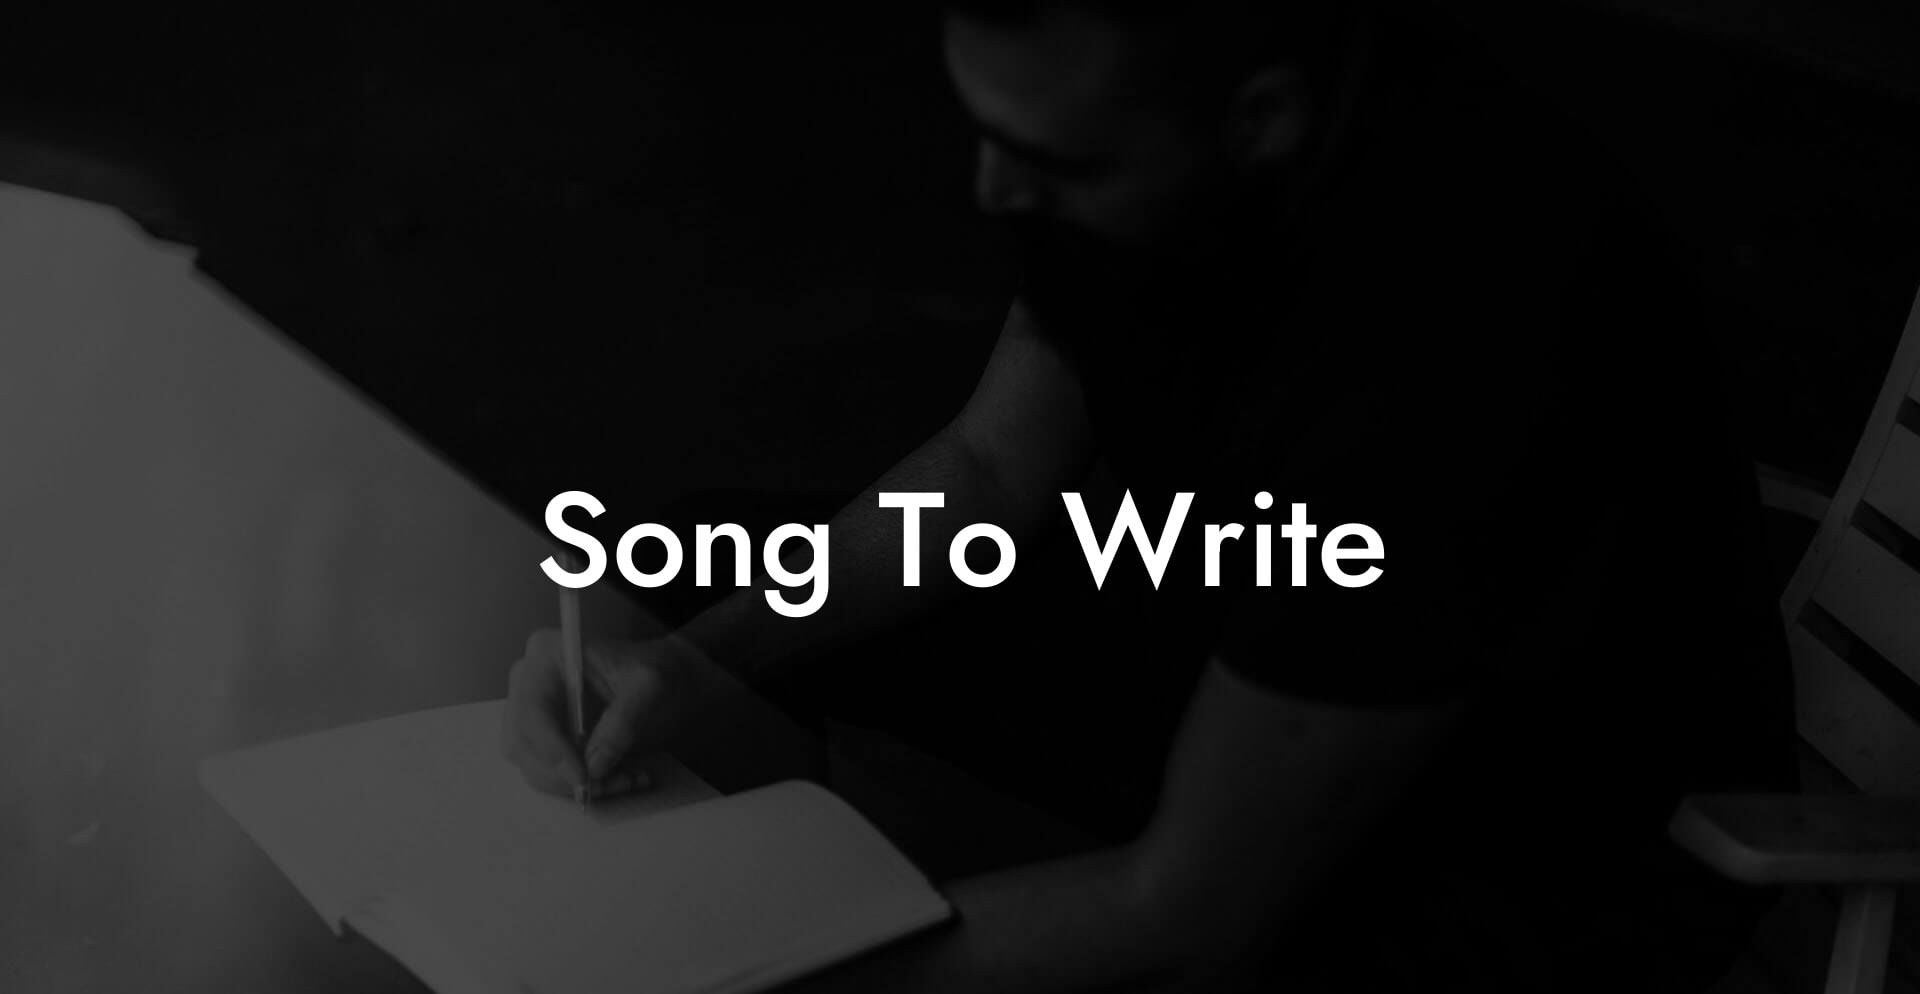 song to write lyric assistant